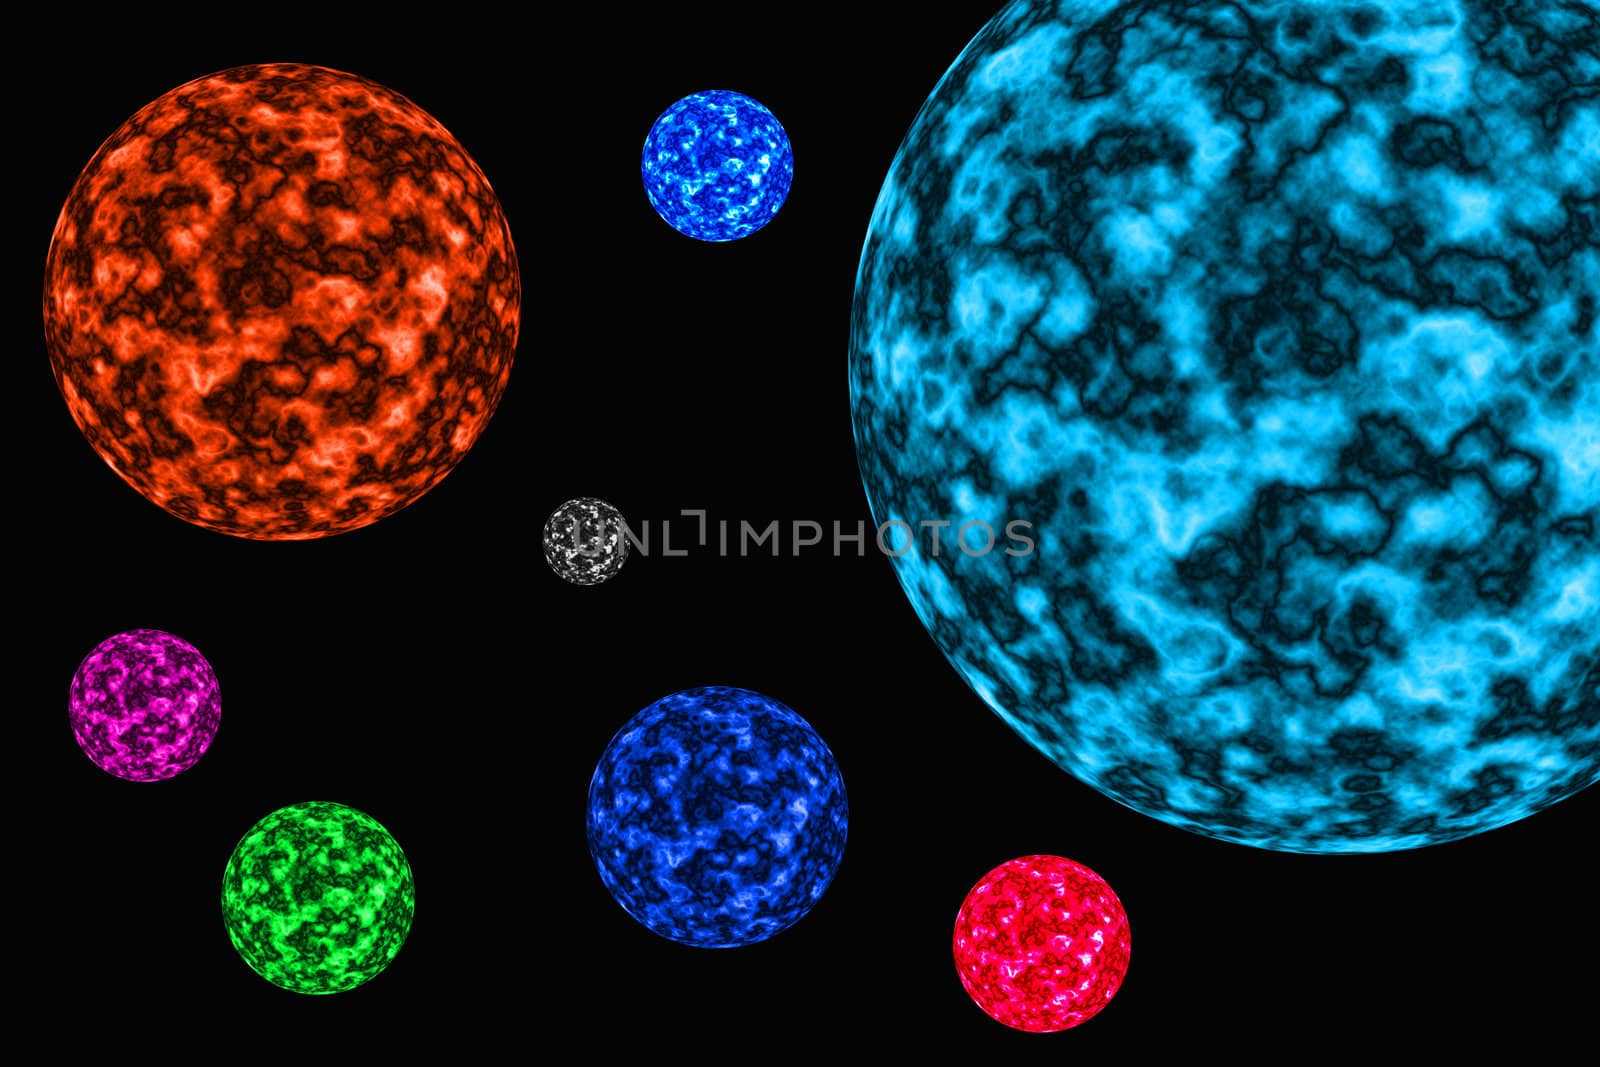 The image of parade of different multi-coloured bright planets